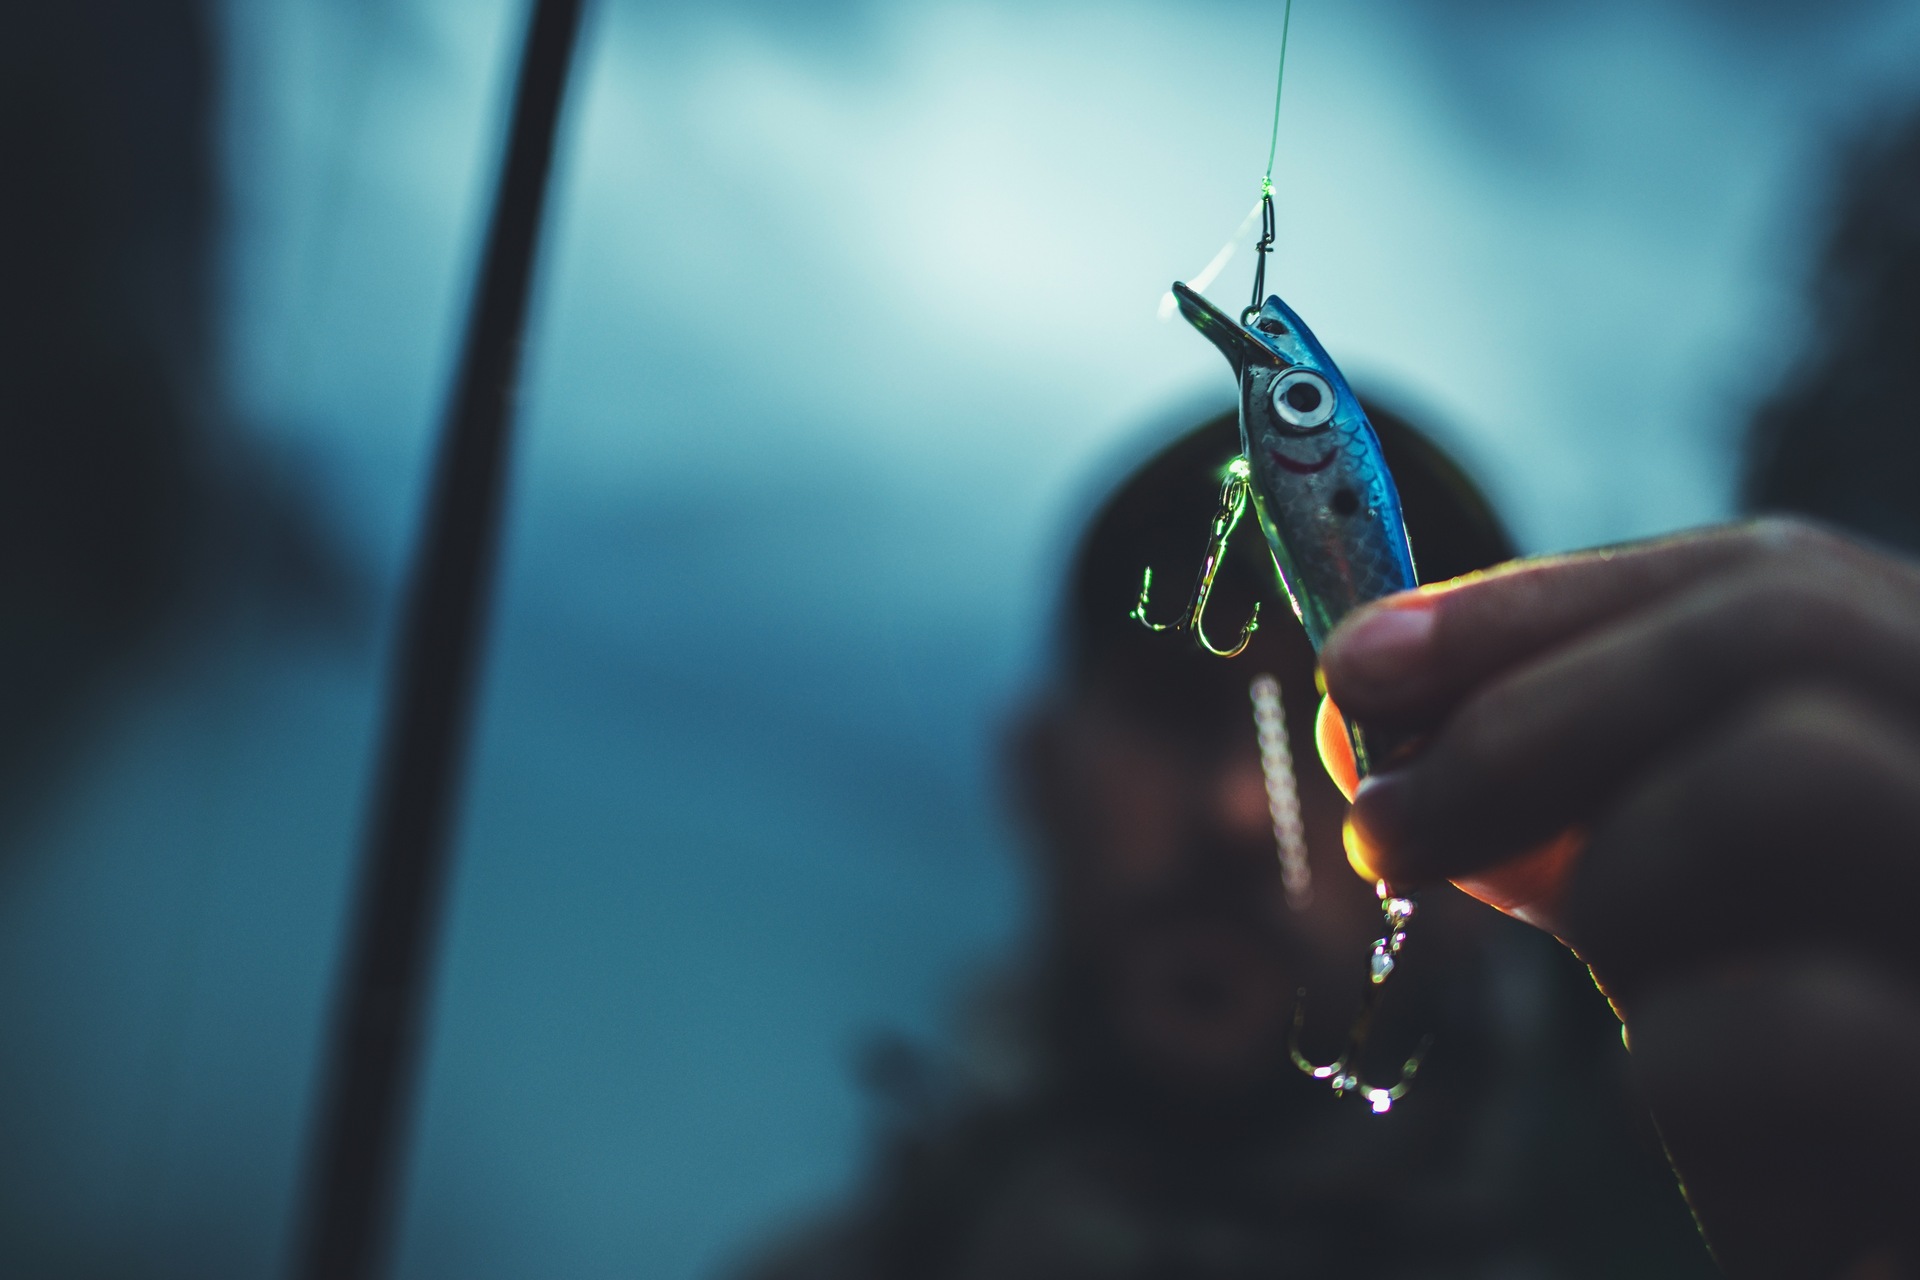 Man holding a fishing lure